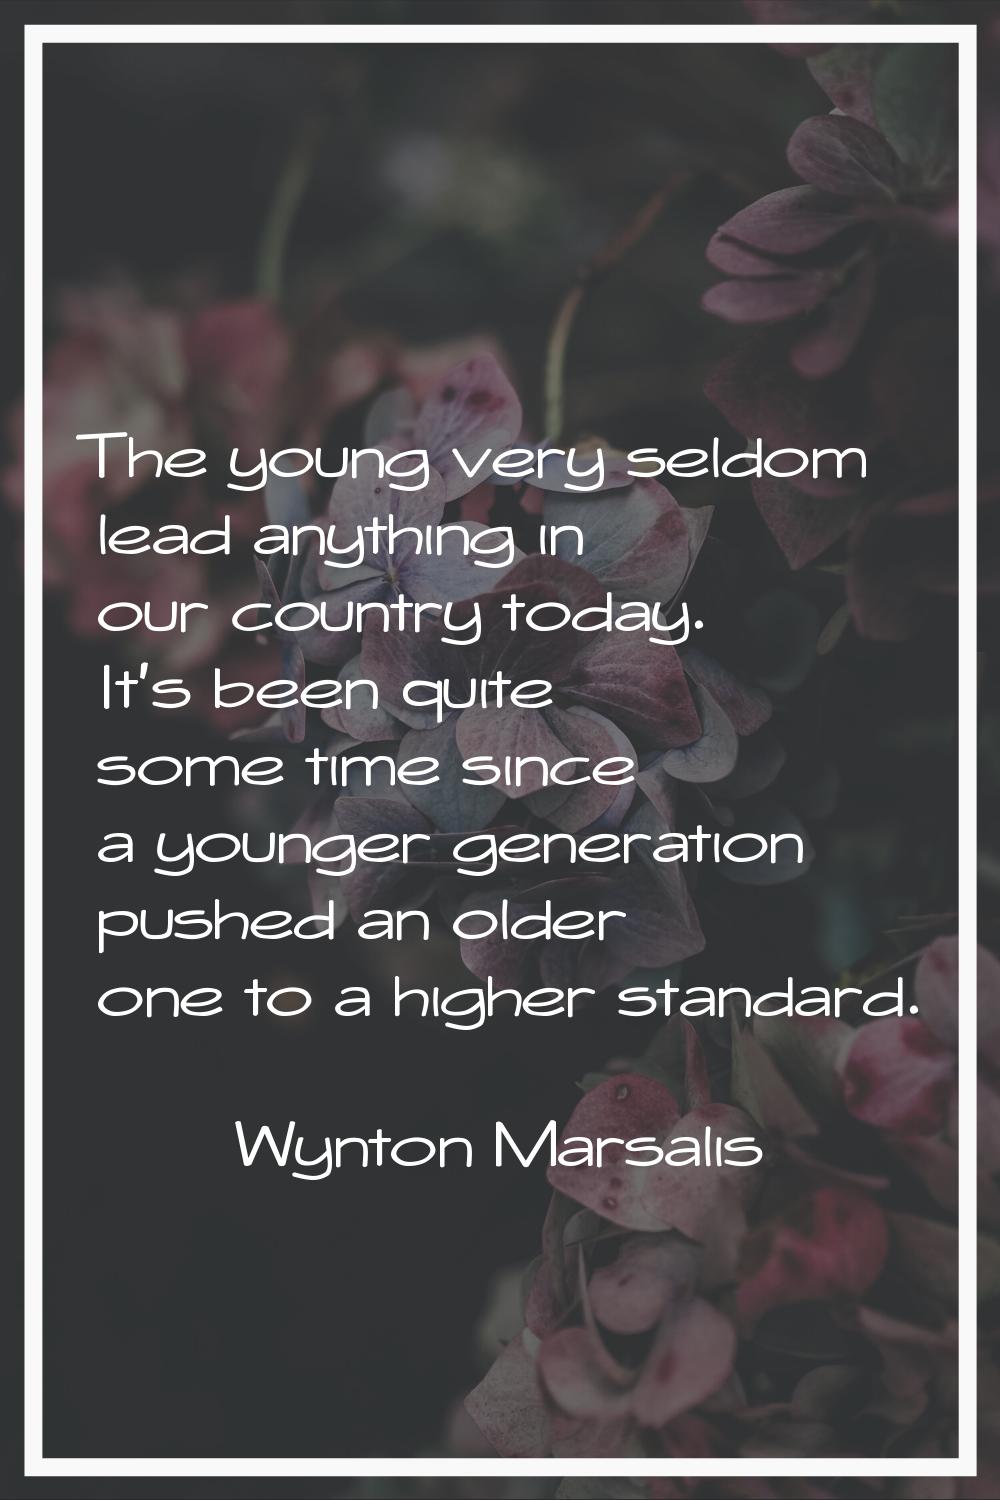 The young very seldom lead anything in our country today. It's been quite some time since a younger